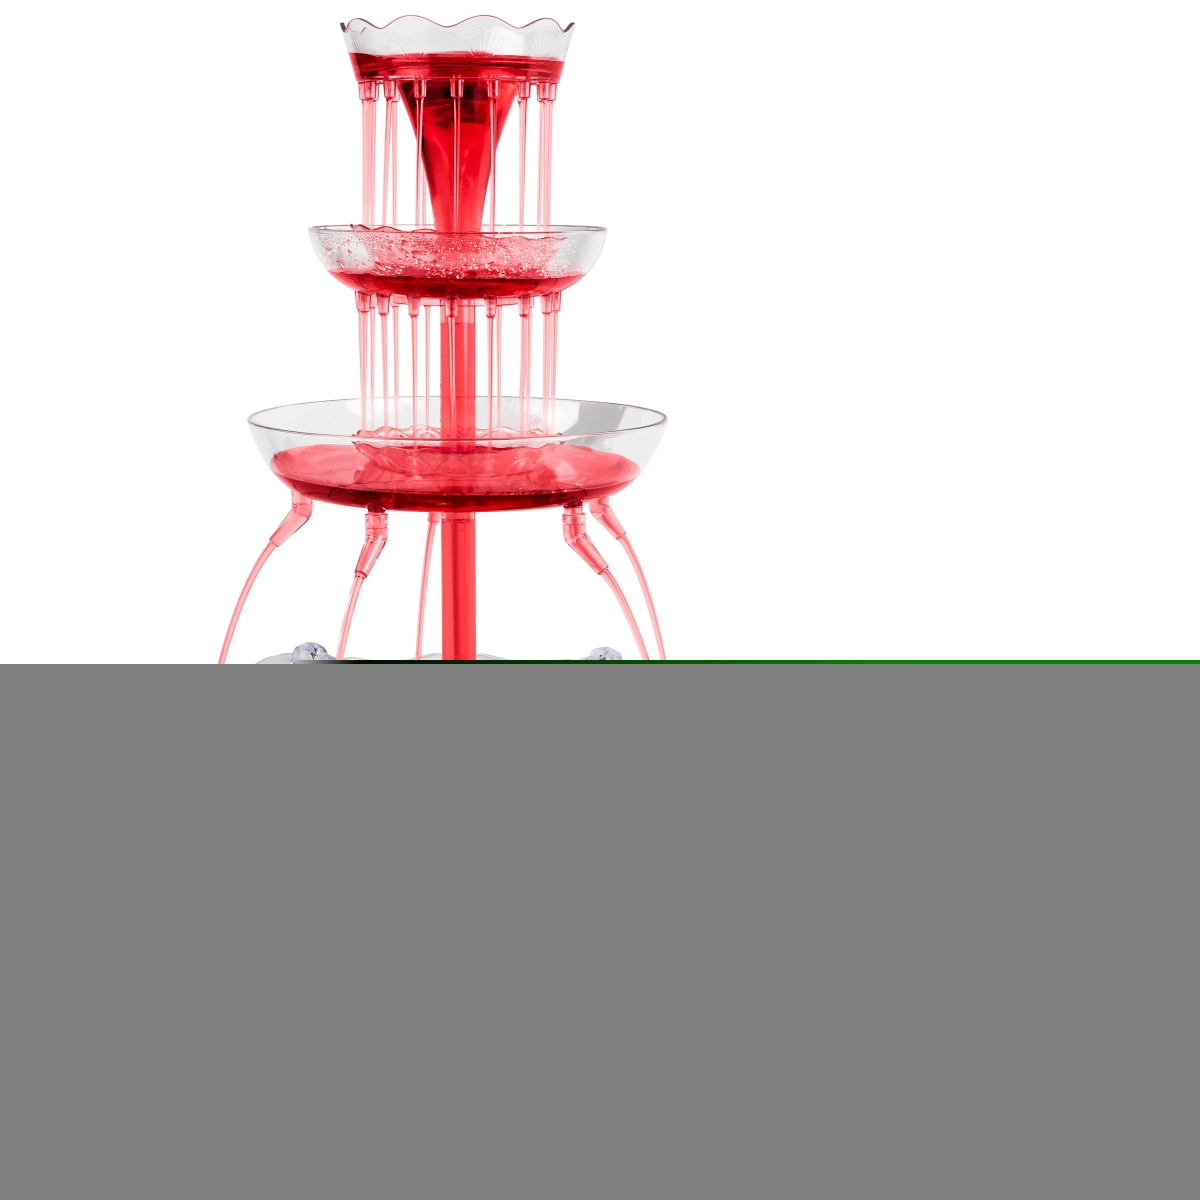 Nostalgia LPF230 3-Tier Lighted Party Fountain, Clear